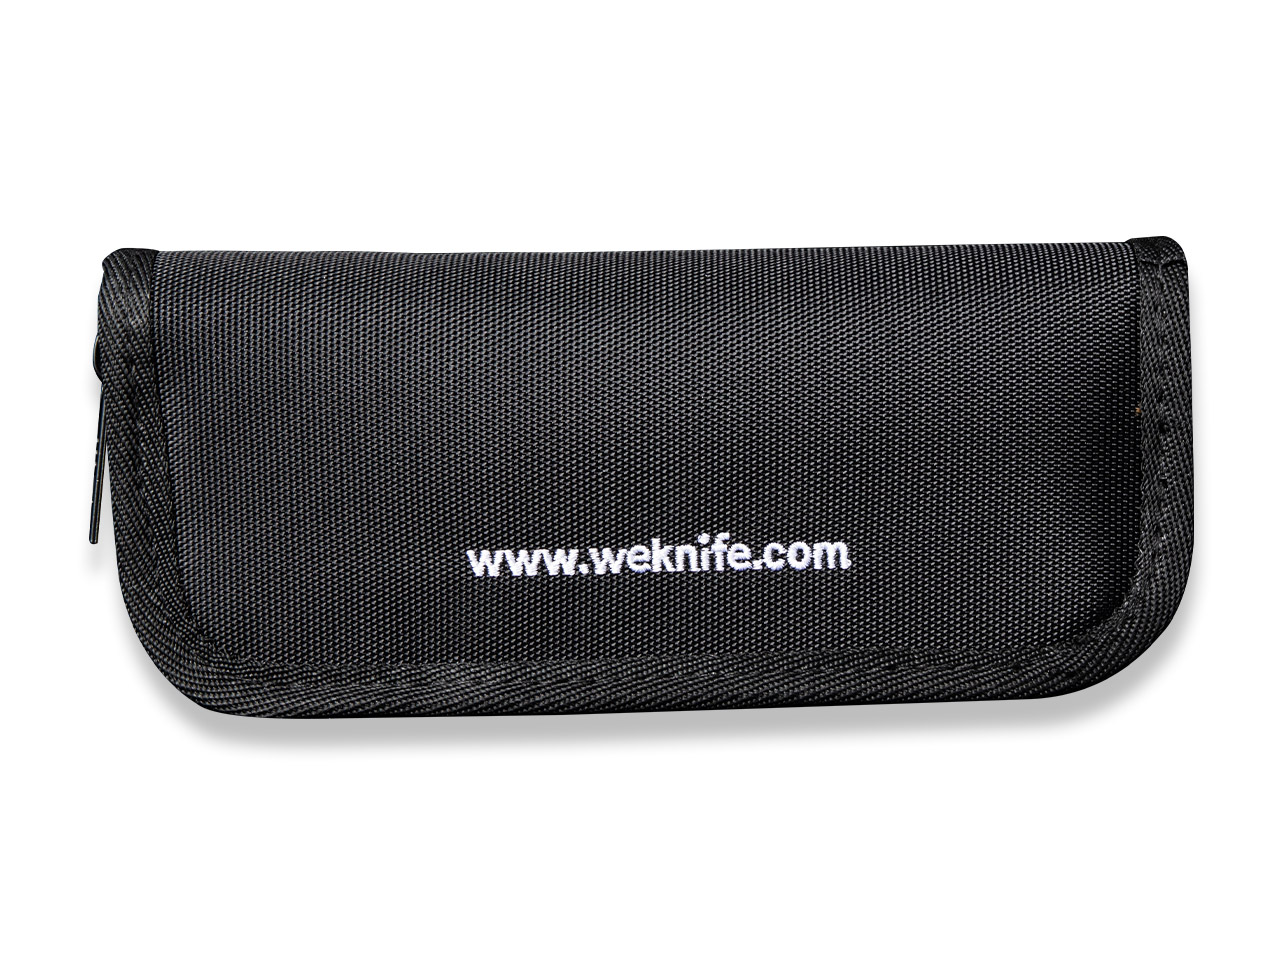 WE-01 Pouch